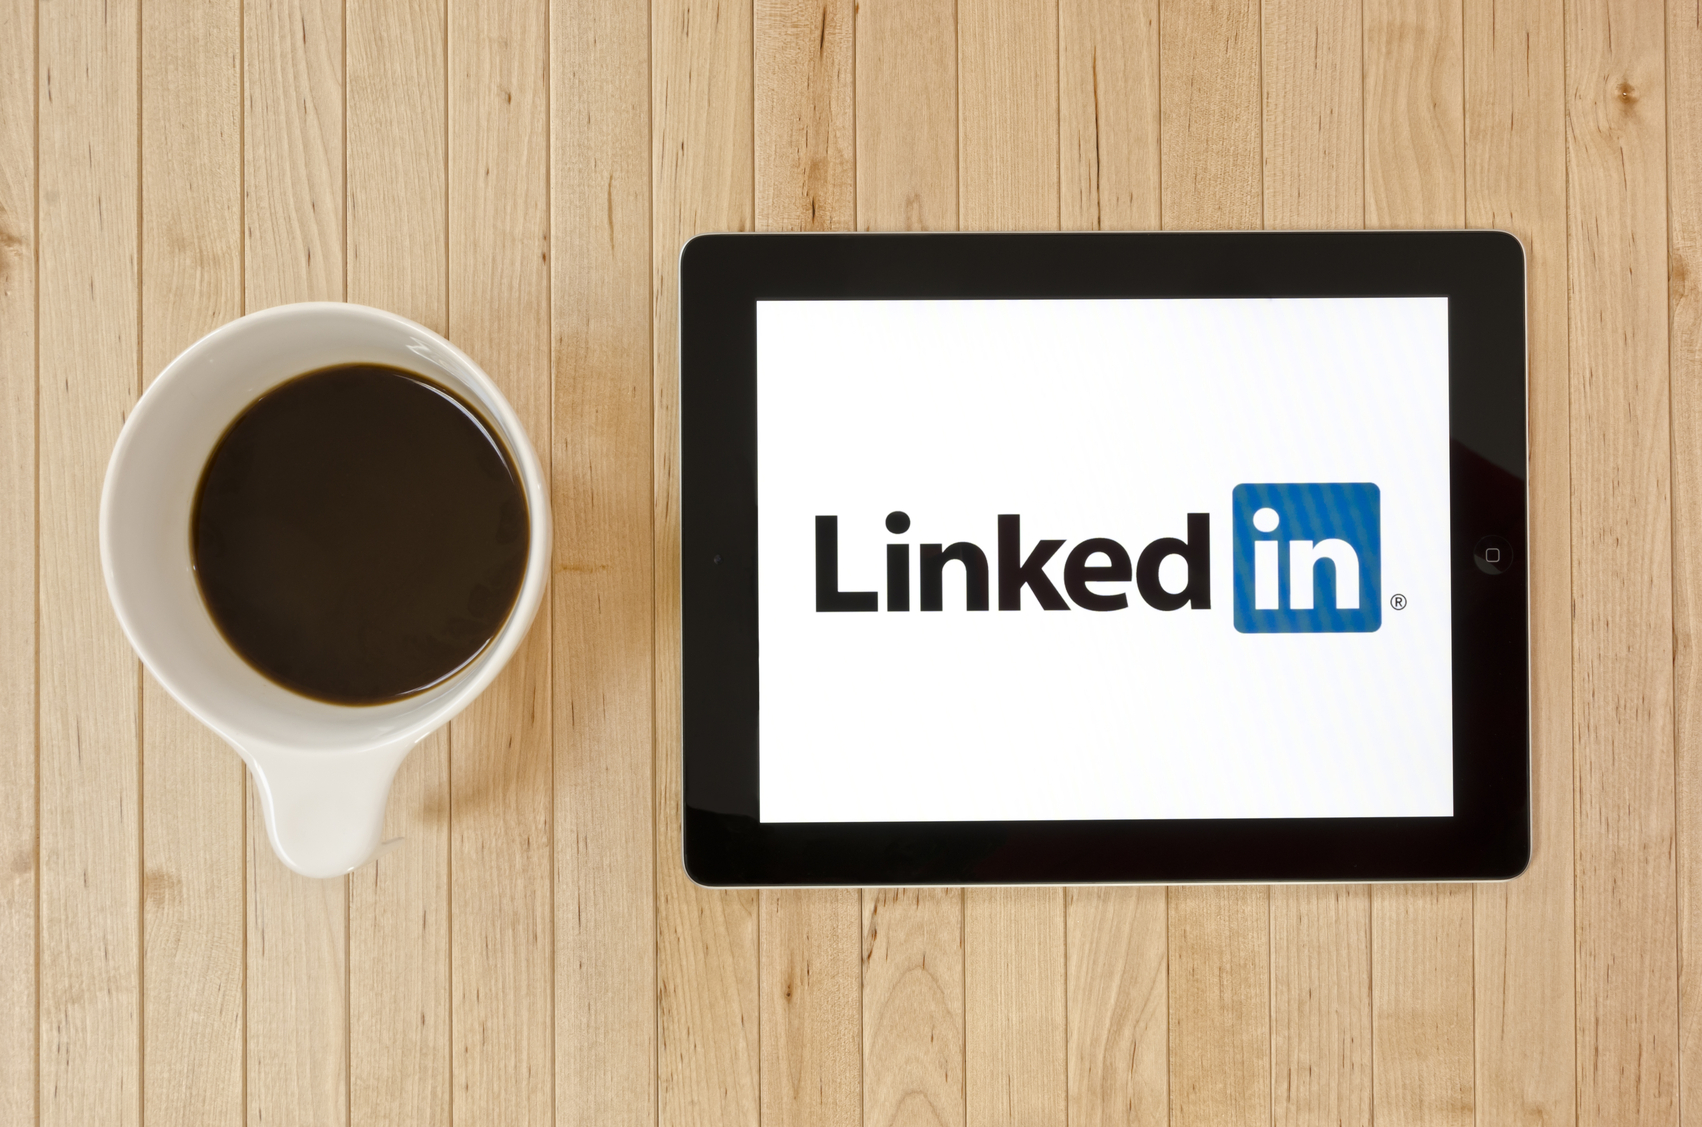 How to Use LinkedIn for Your Job Search